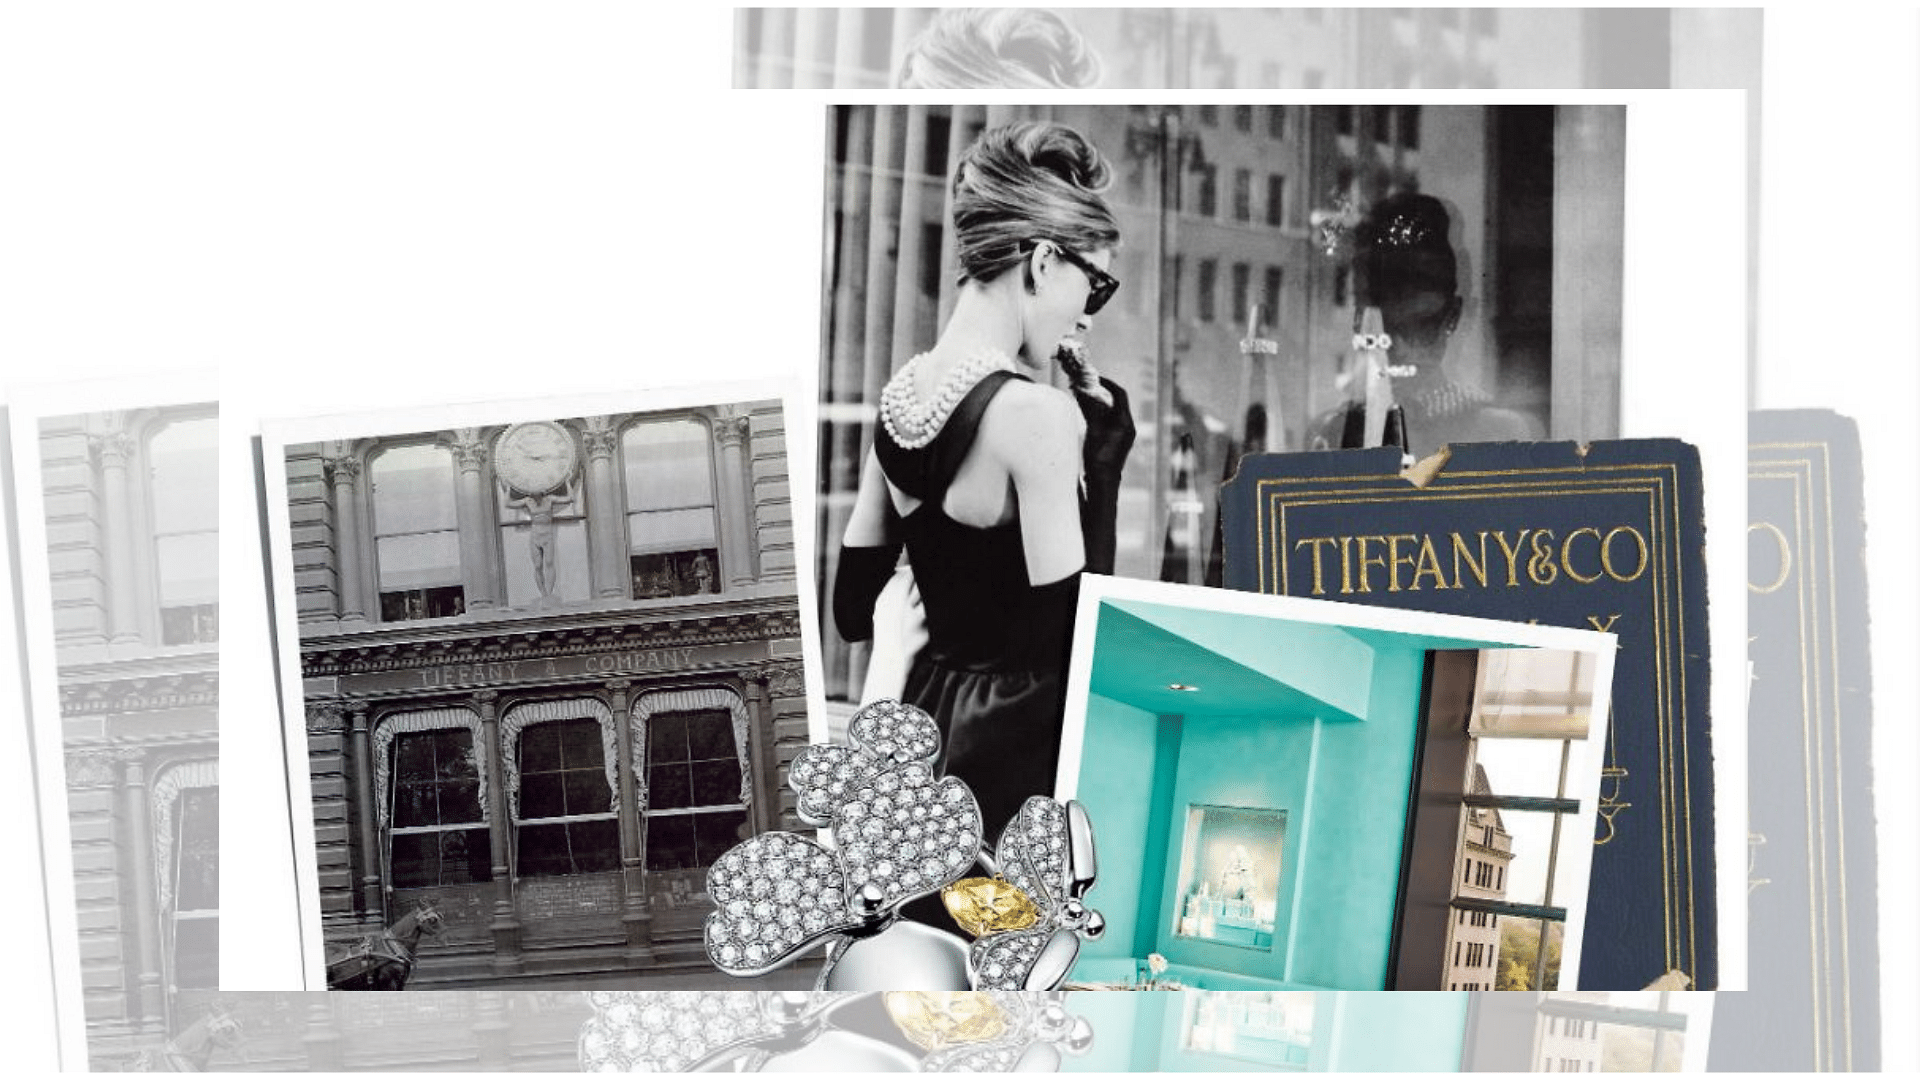 Tiffany and Co became famous with the movie ‘Breakfast at Tiffany’s.’